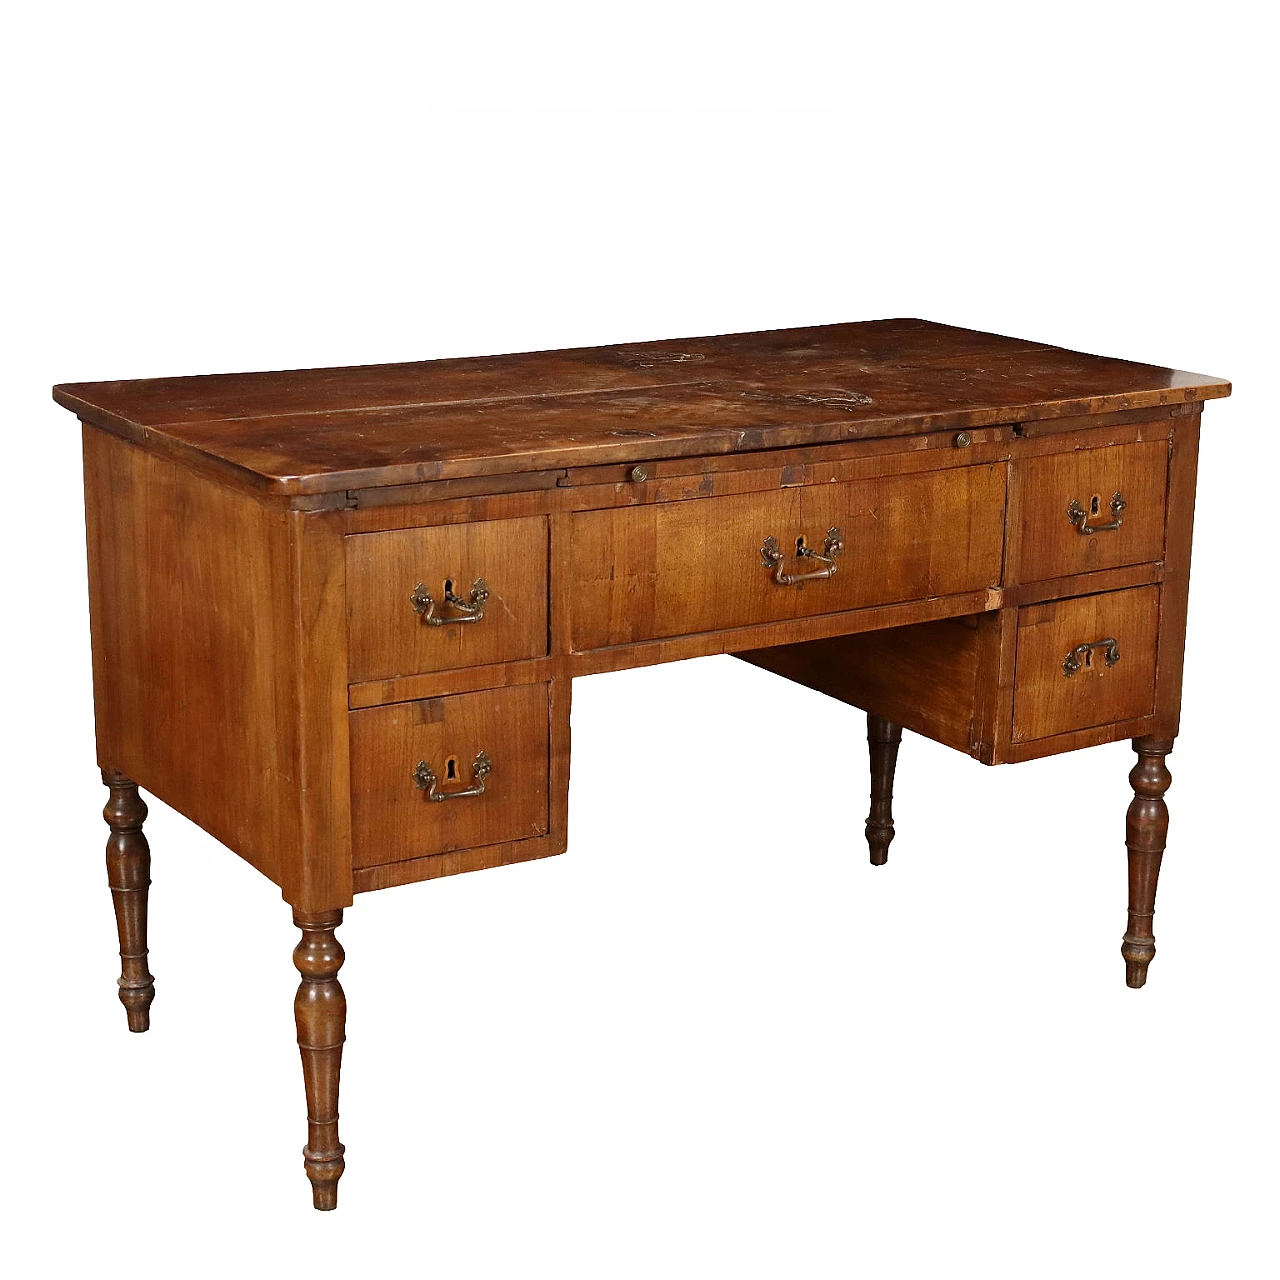 Desk in walnut with 5 drawers and fir interior, 19th century 1